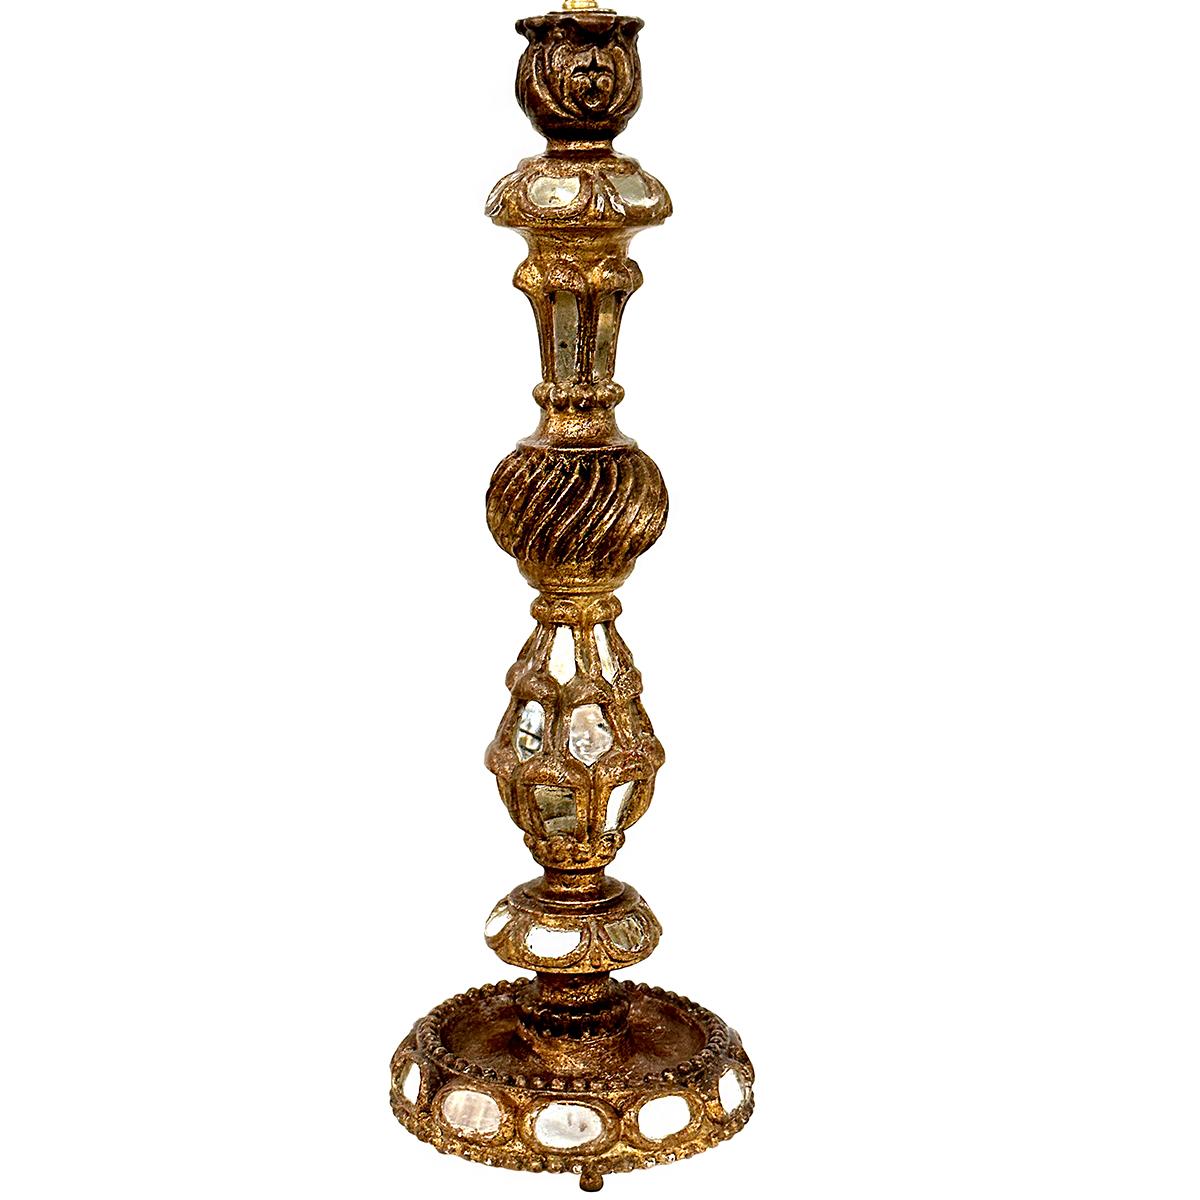 A circa 1920's Spanish candlestick lamp with mirror insets.

Measurements:
Height of body: 27